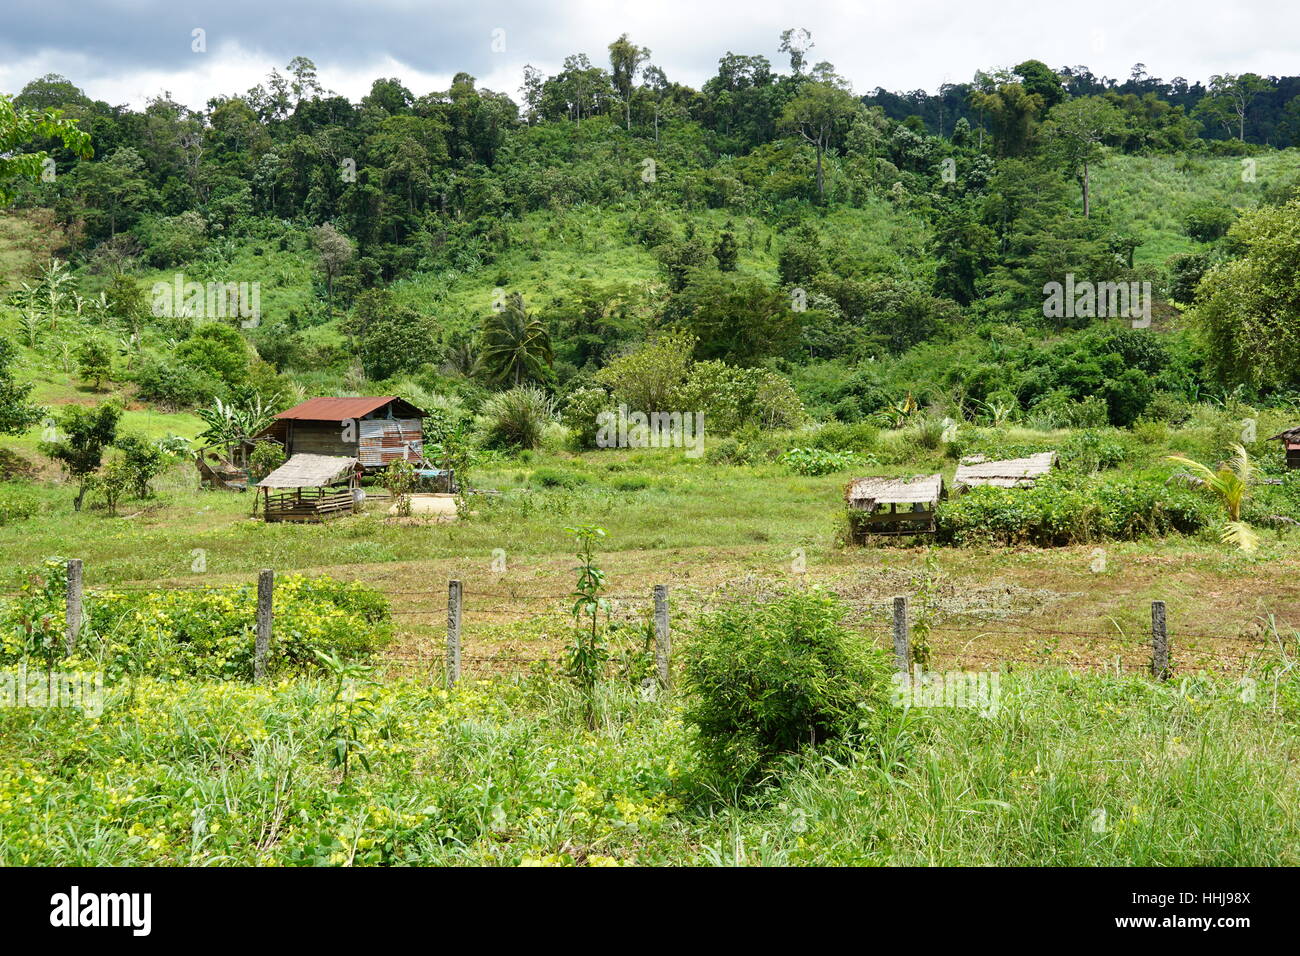 Rural / Remote House Made of Wood and Tin in Samlout, Cambodia Stock Photo